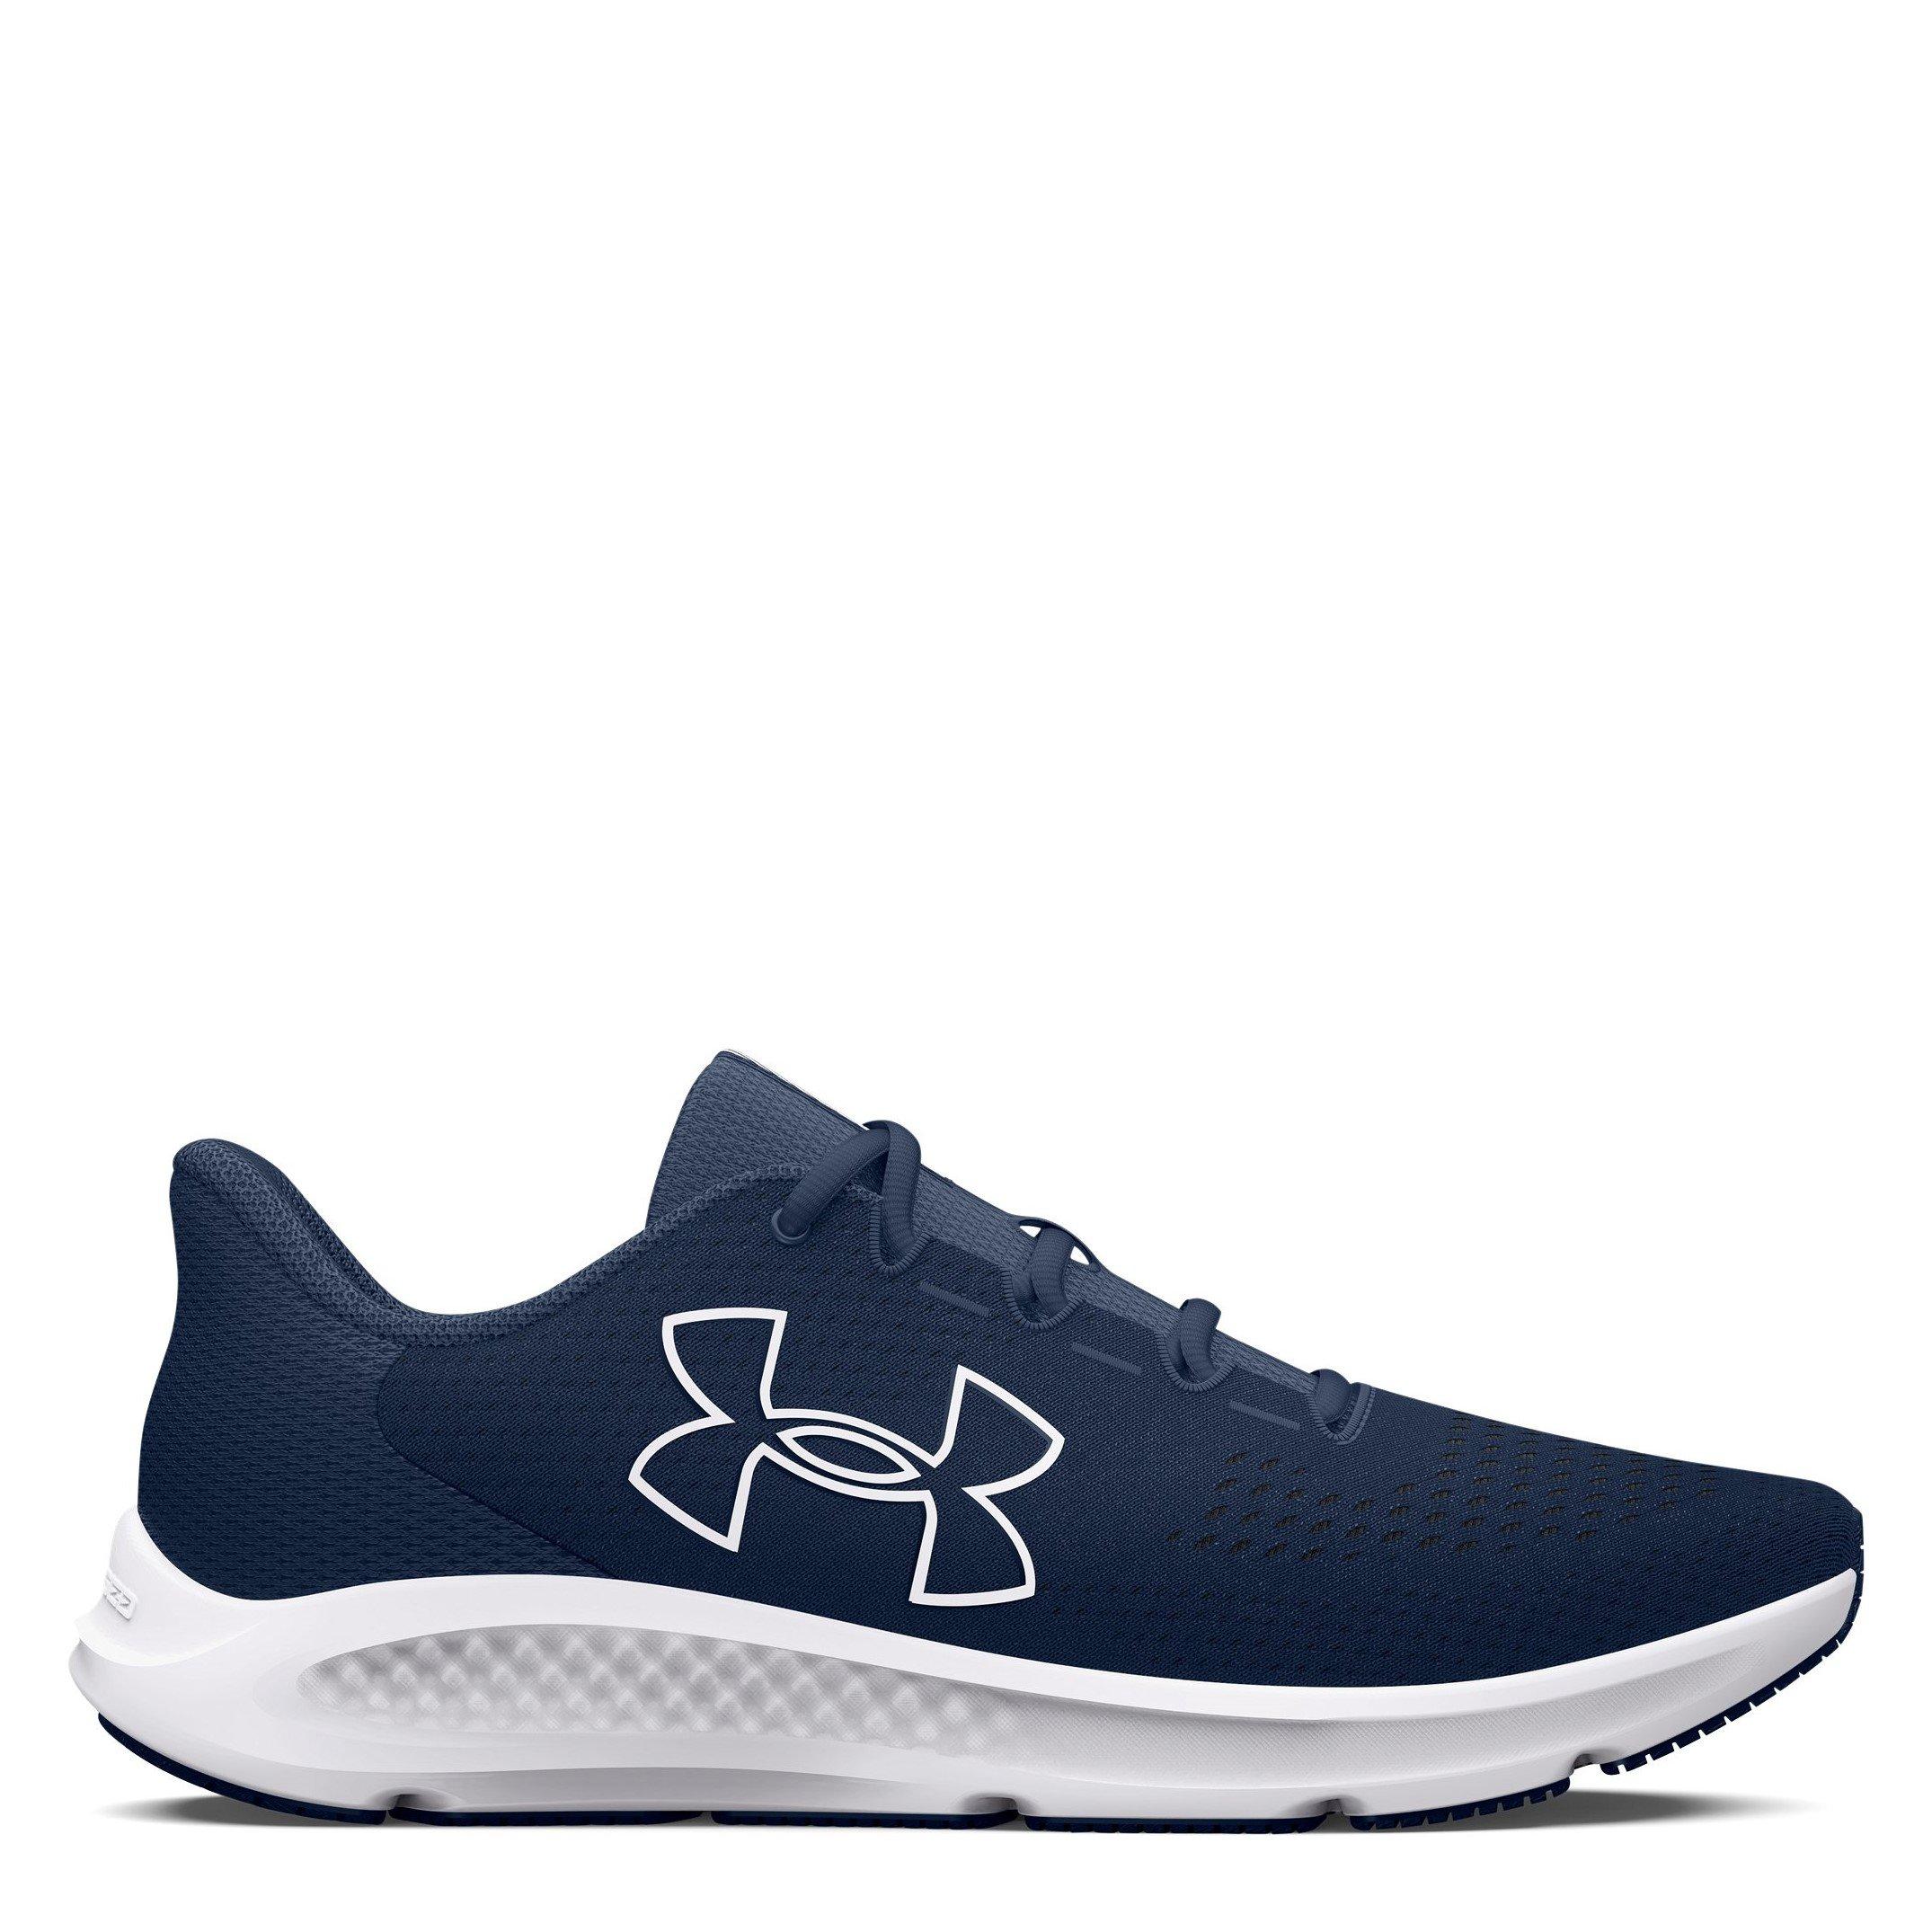 Under Armour, Charged Pursuit 2 Big Logo Mens Shoes, Runners